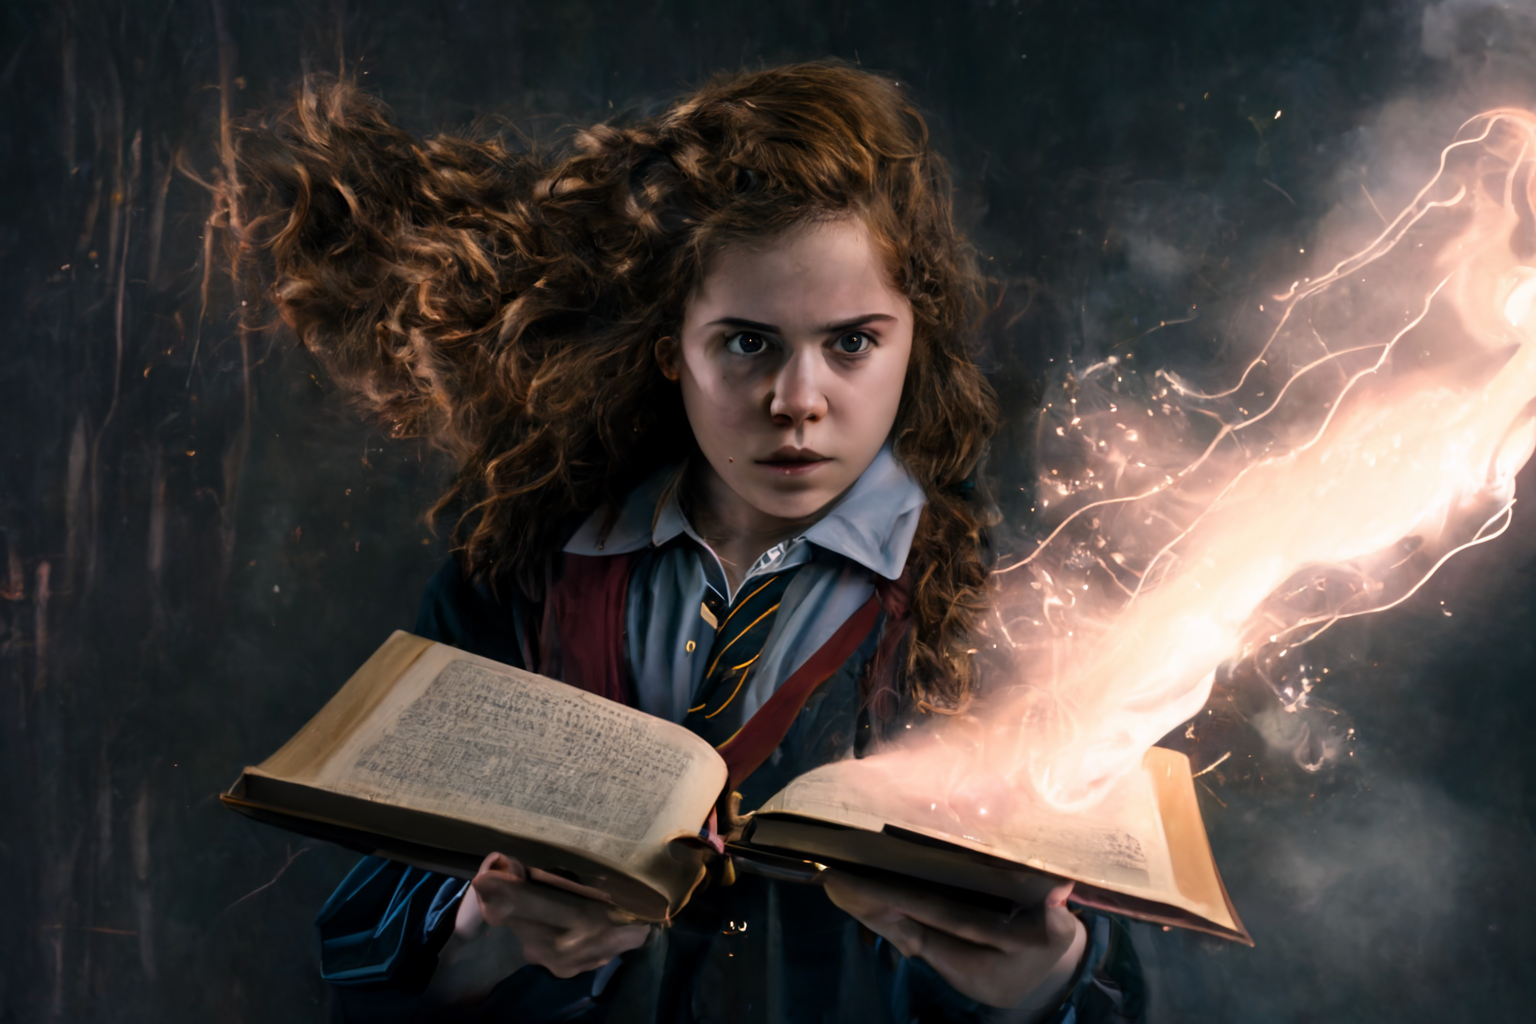 Girl in school uniform with flowing hair, holding a book with emanating mystical light.